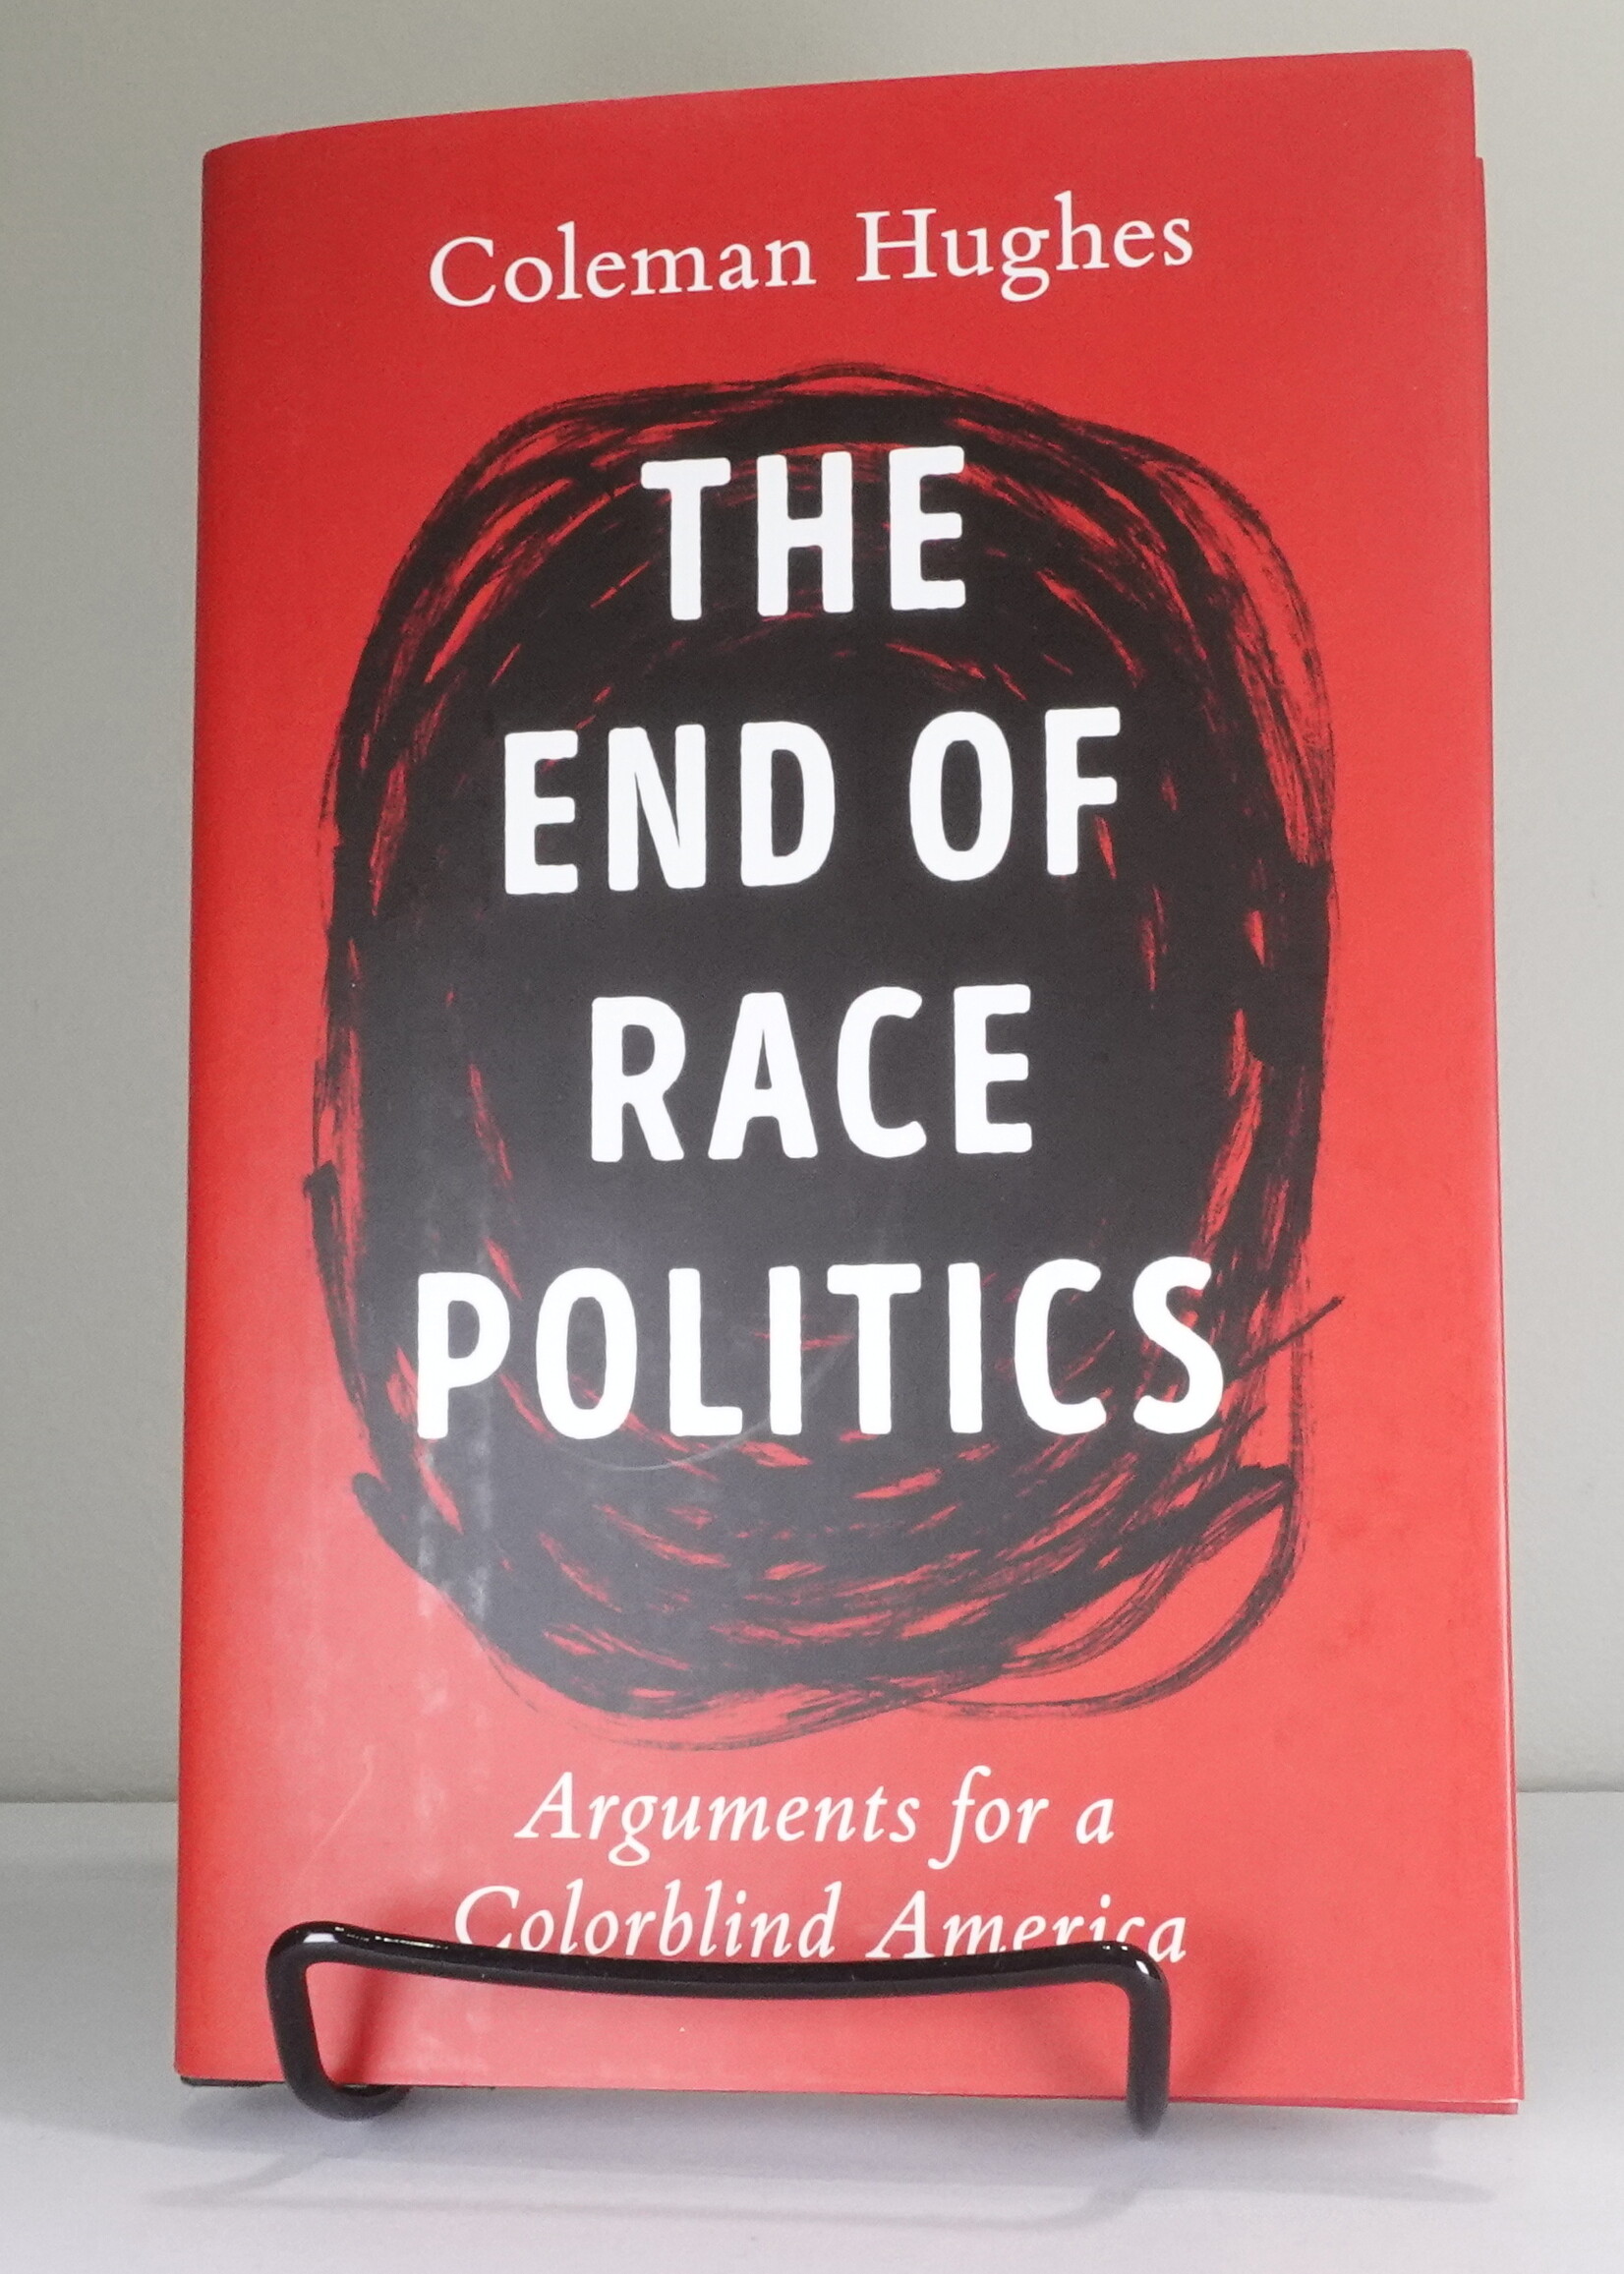 Thesis The End of Race Politics: Arguments for a Colorblind America (u)